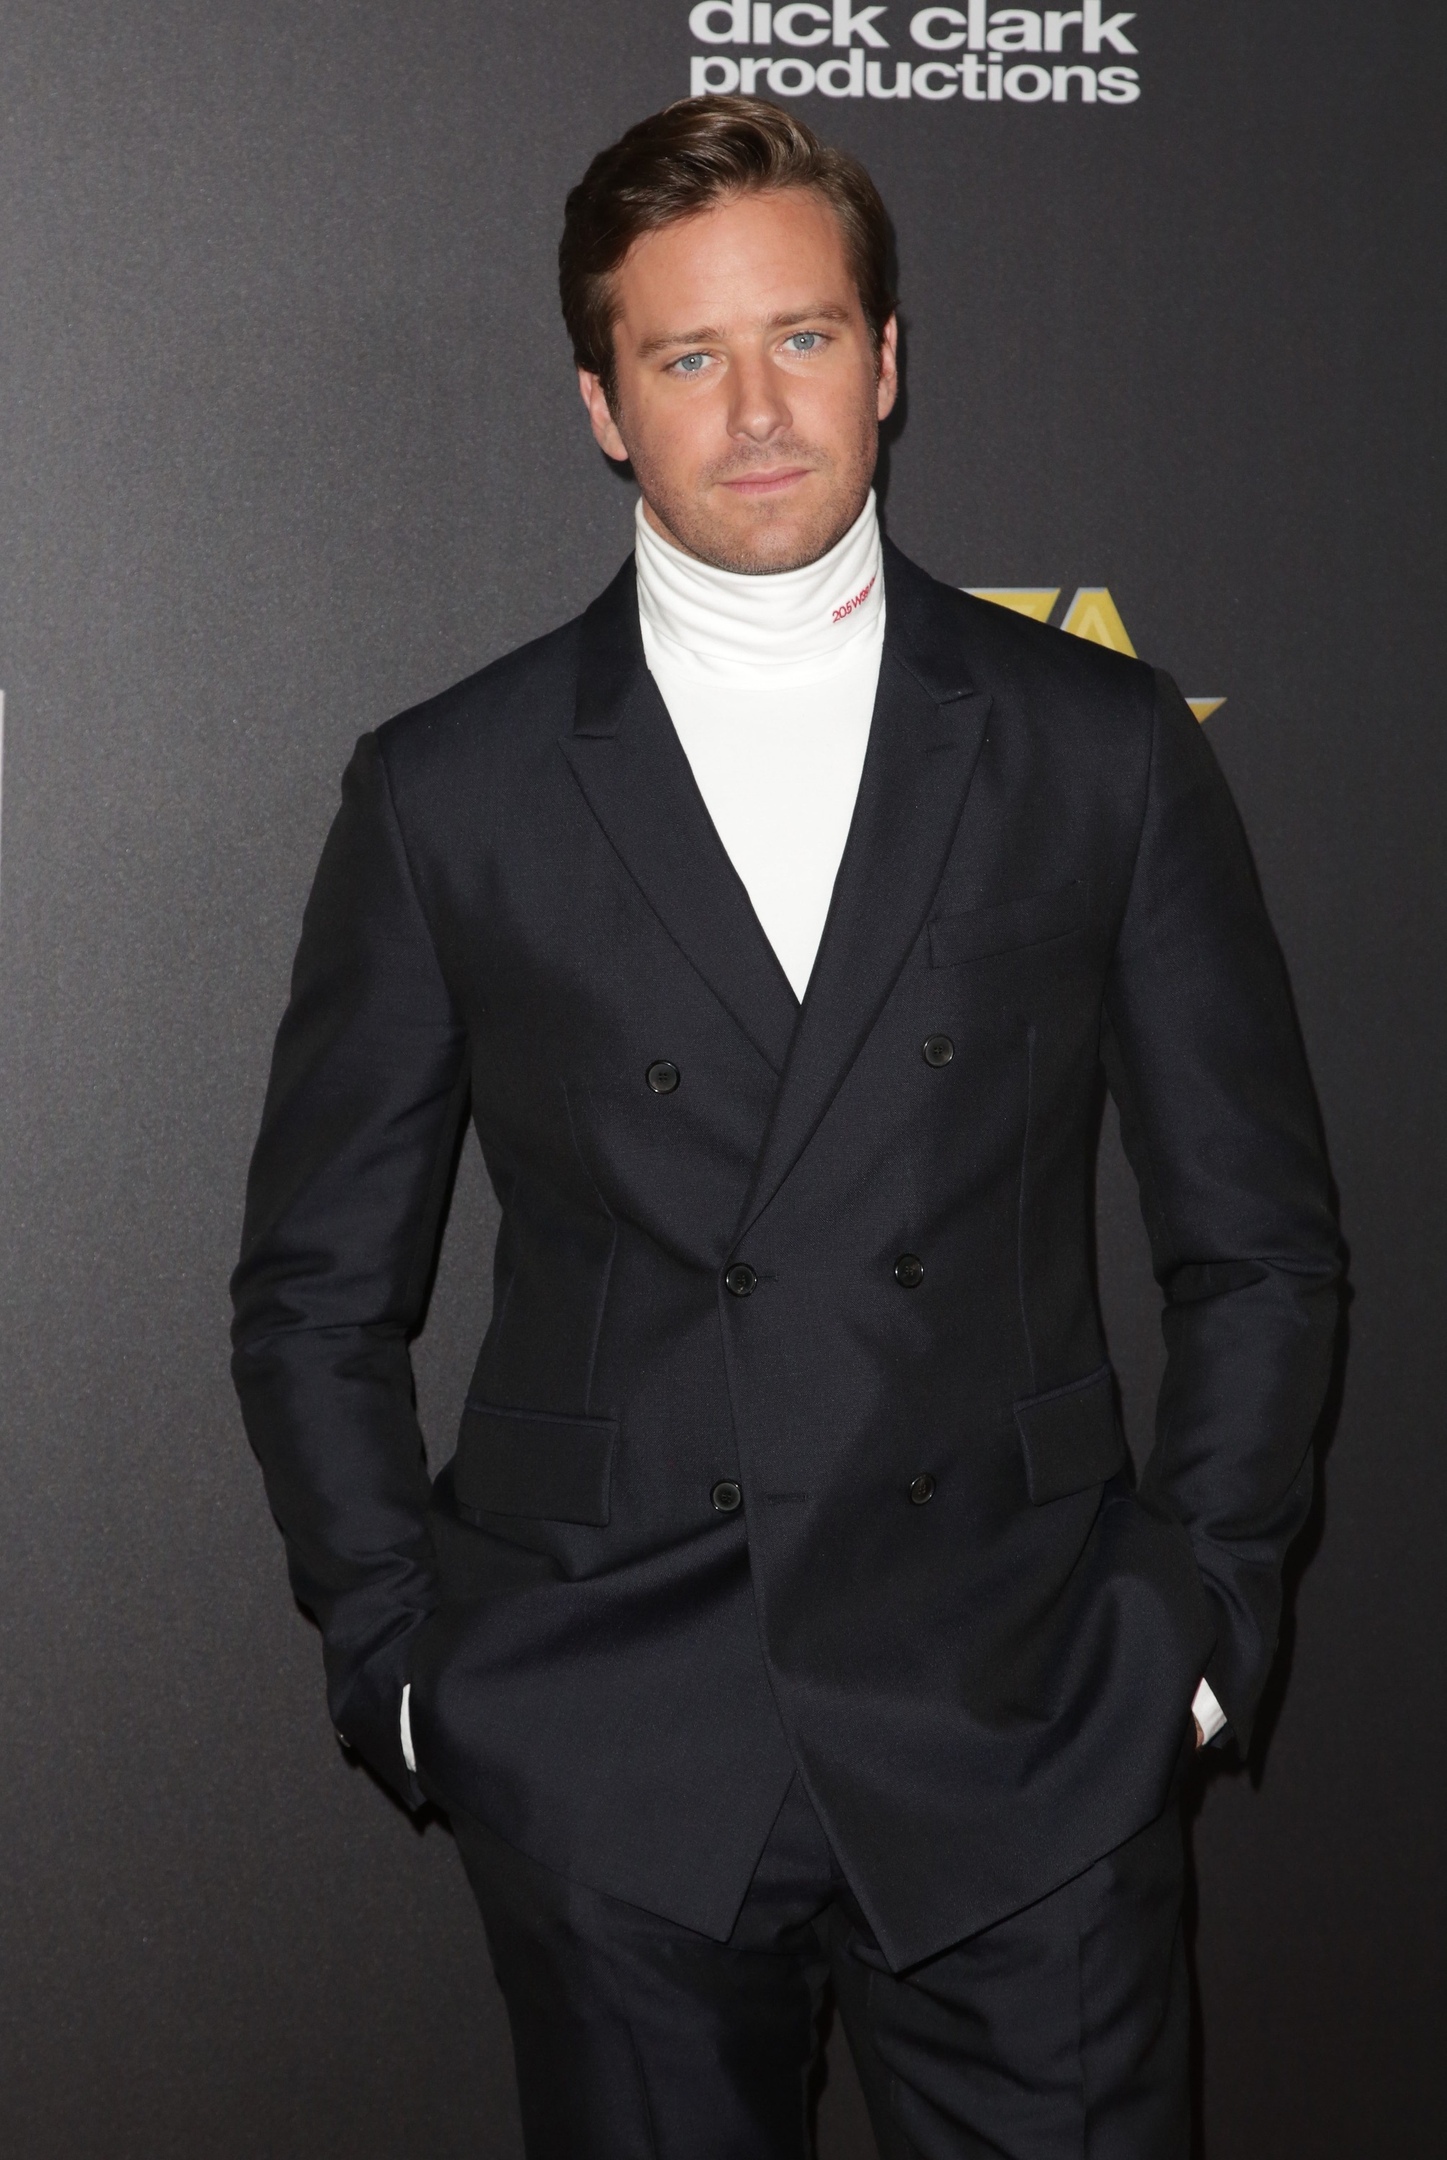 Armie Hammer photo 338 of 453 pics, wallpaper - photo #1309708 - ThePlace2